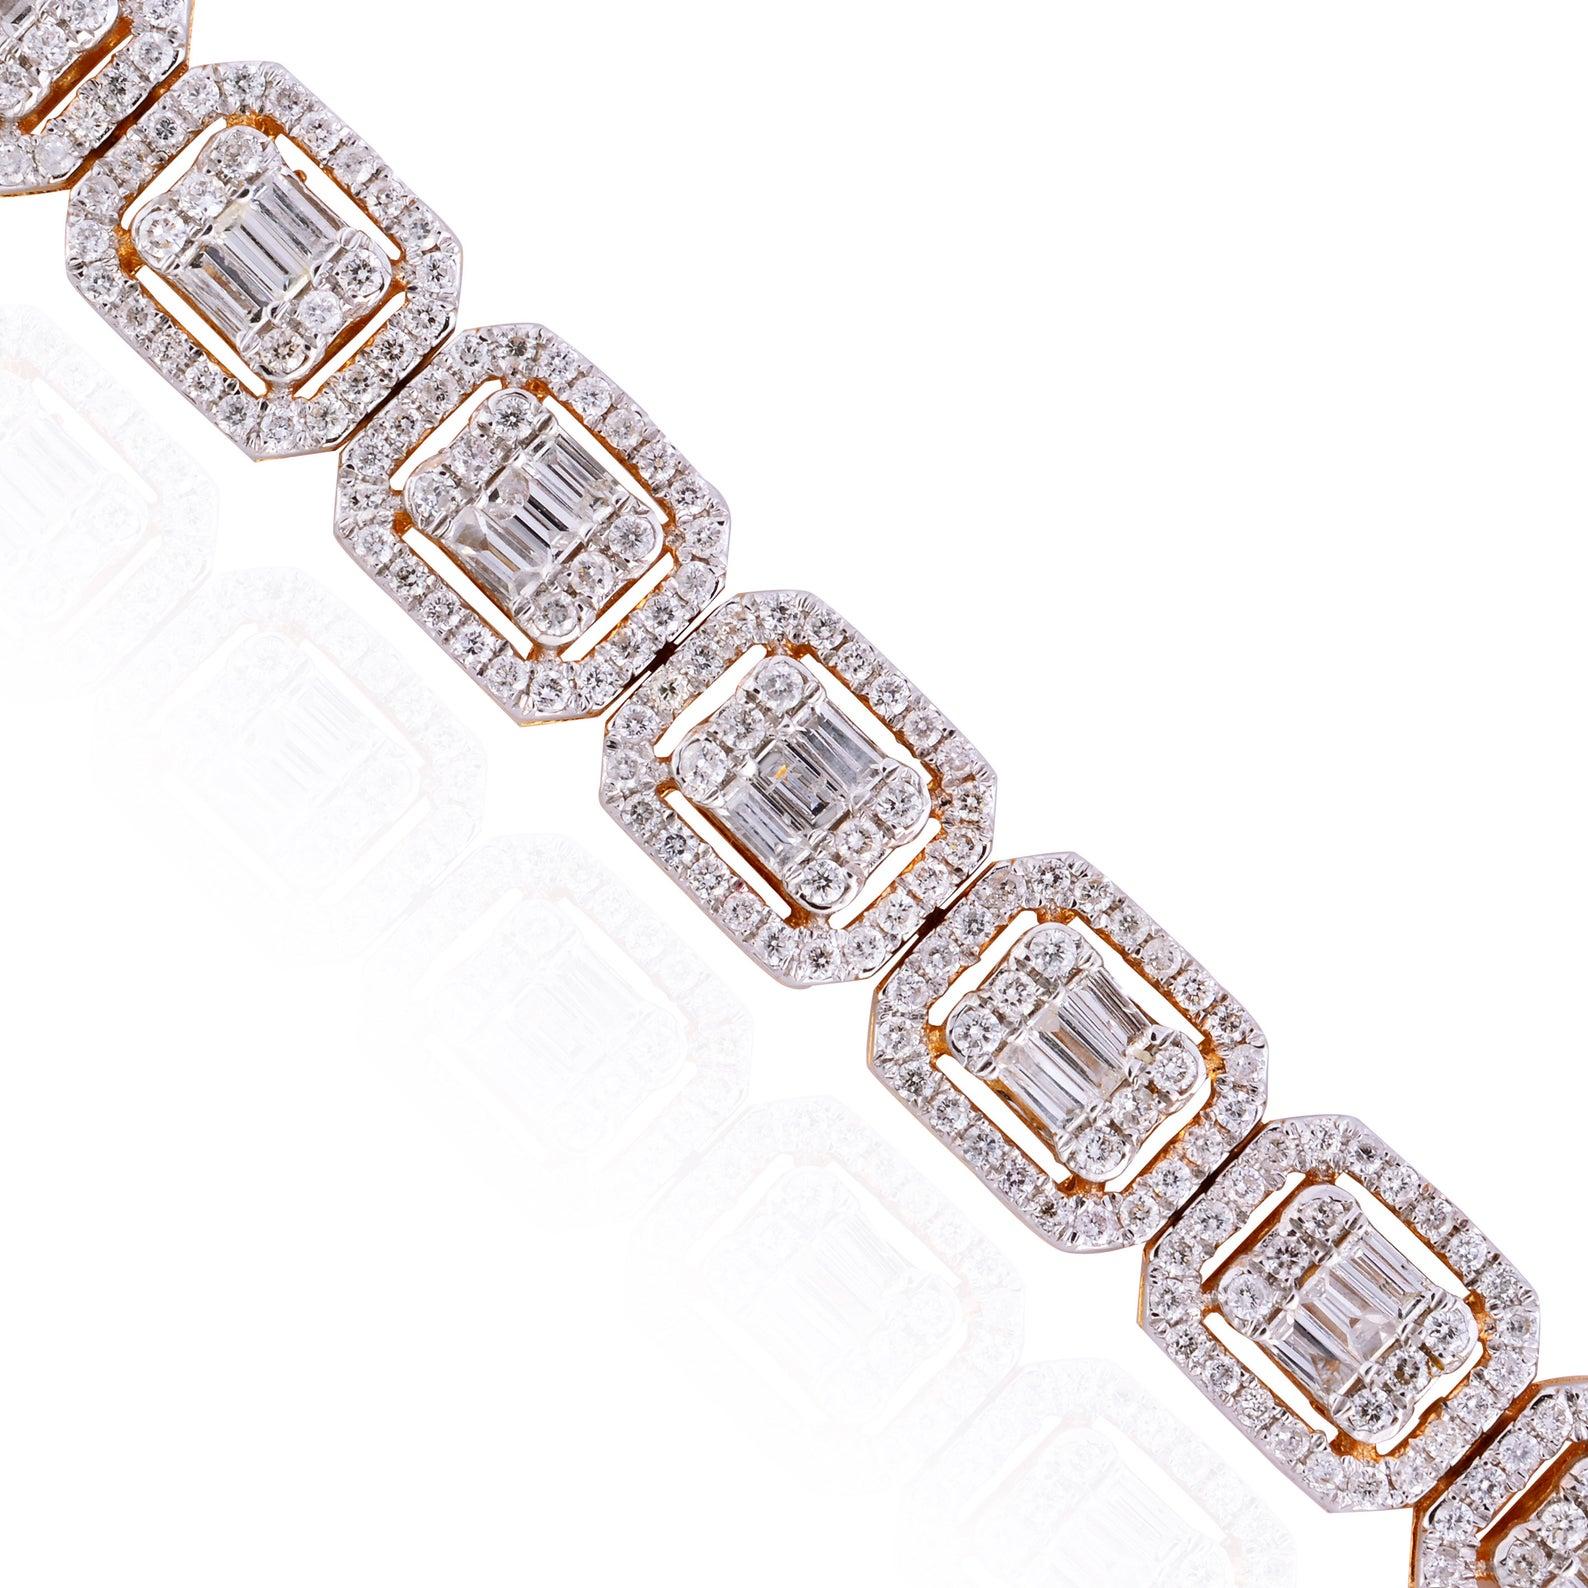 A beautiful bracelet handmade in 14K gold and set in 4.65 carats of baguette sparkling diamonds. 
Wear it alone or stack it with your favorite pieces.

FOLLOW MEGHNA JEWELS storefront to view the latest collection & exclusive pieces. Meghna Jewels